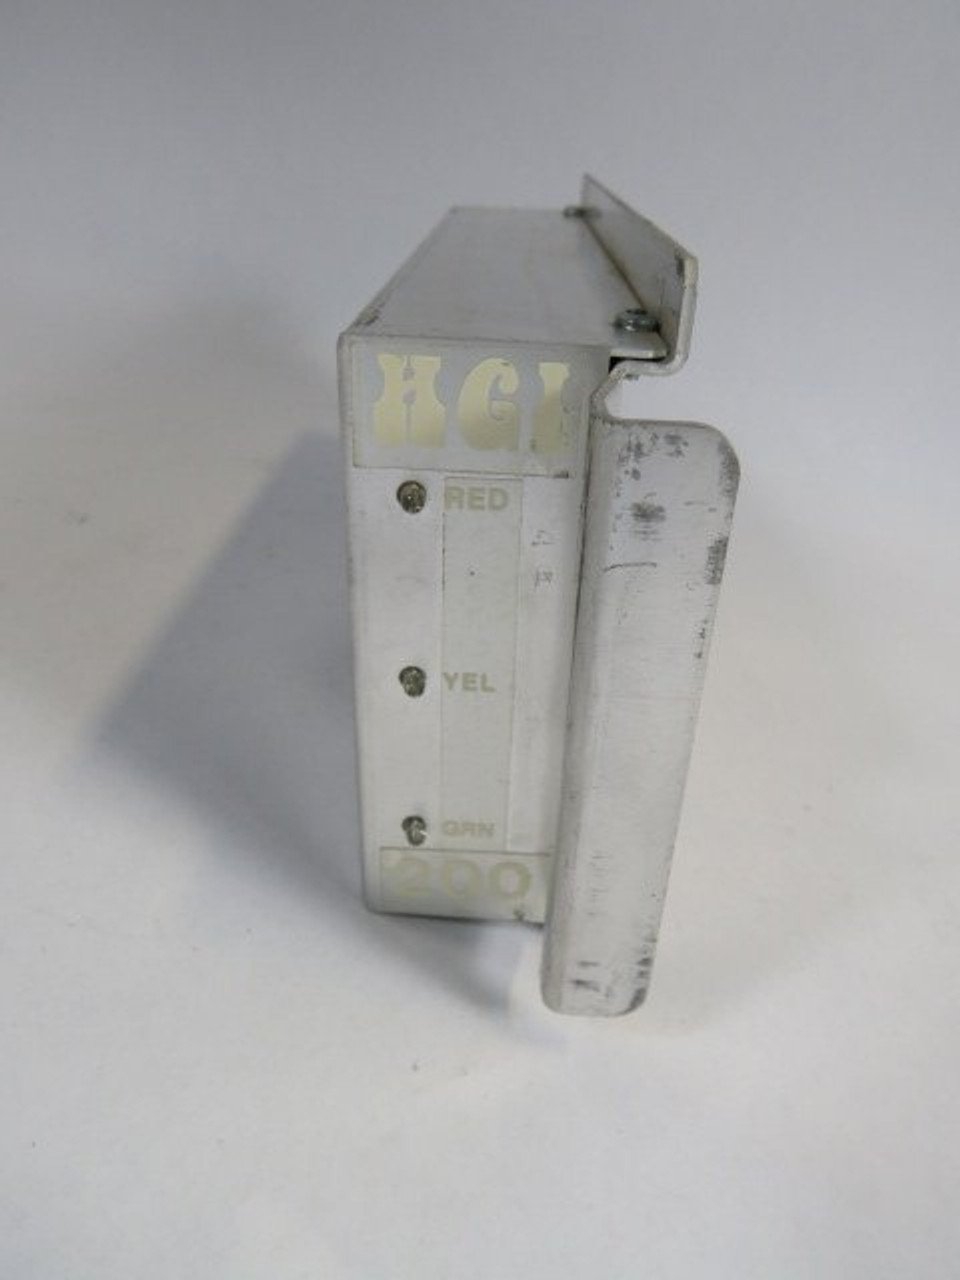 HGI Product MODULAR200-201 Load Switch 25A MODIFIED PART NUMBER USED